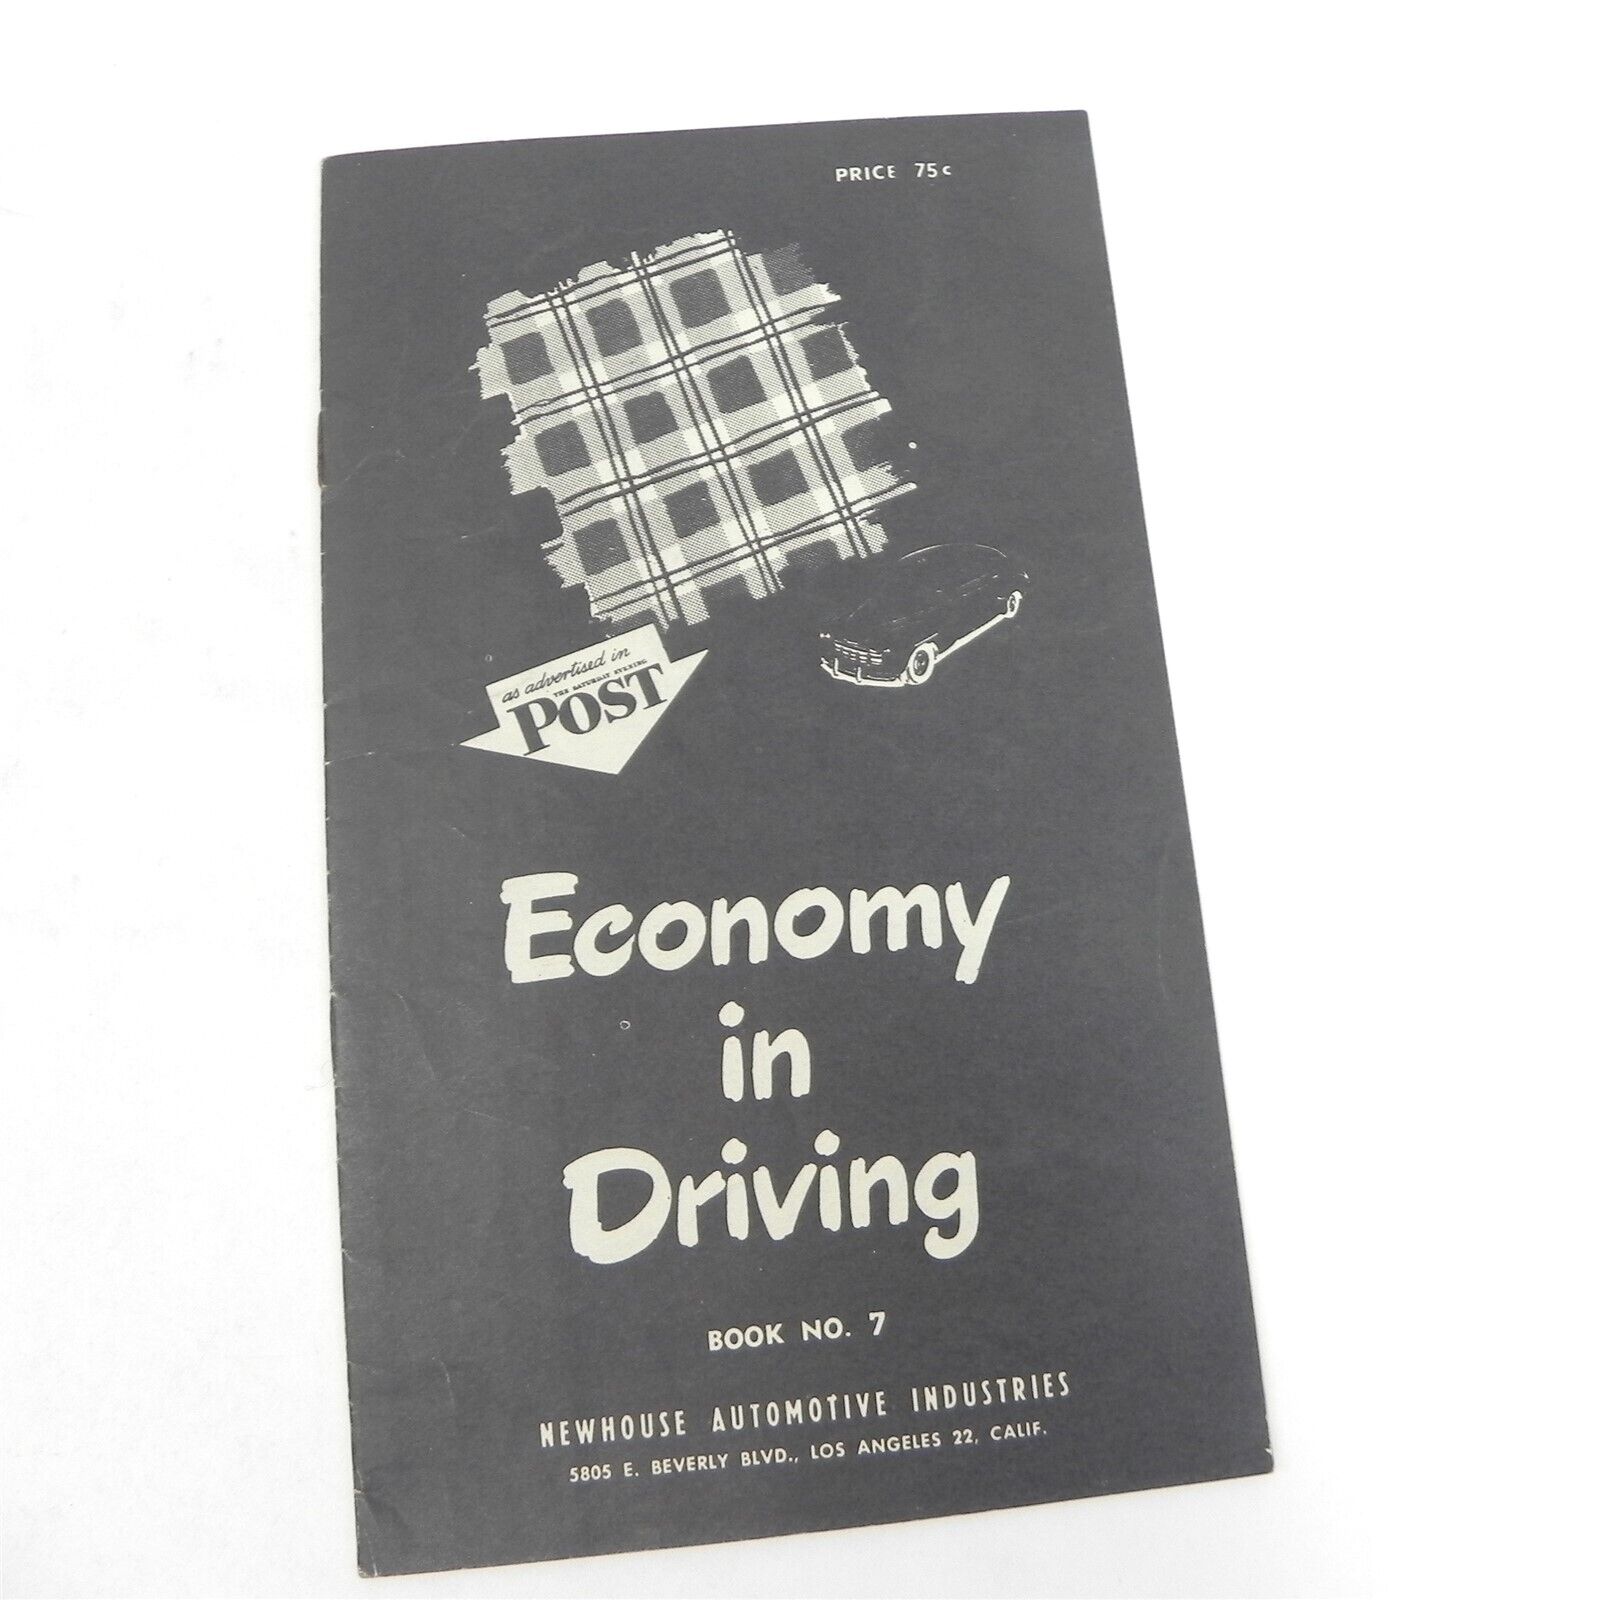 VTG ECONOMY IN DRIVING BOOK NUMBER 7 NEWHOUSE AUTO INDUSTRIES HOW TO SAVE GAS